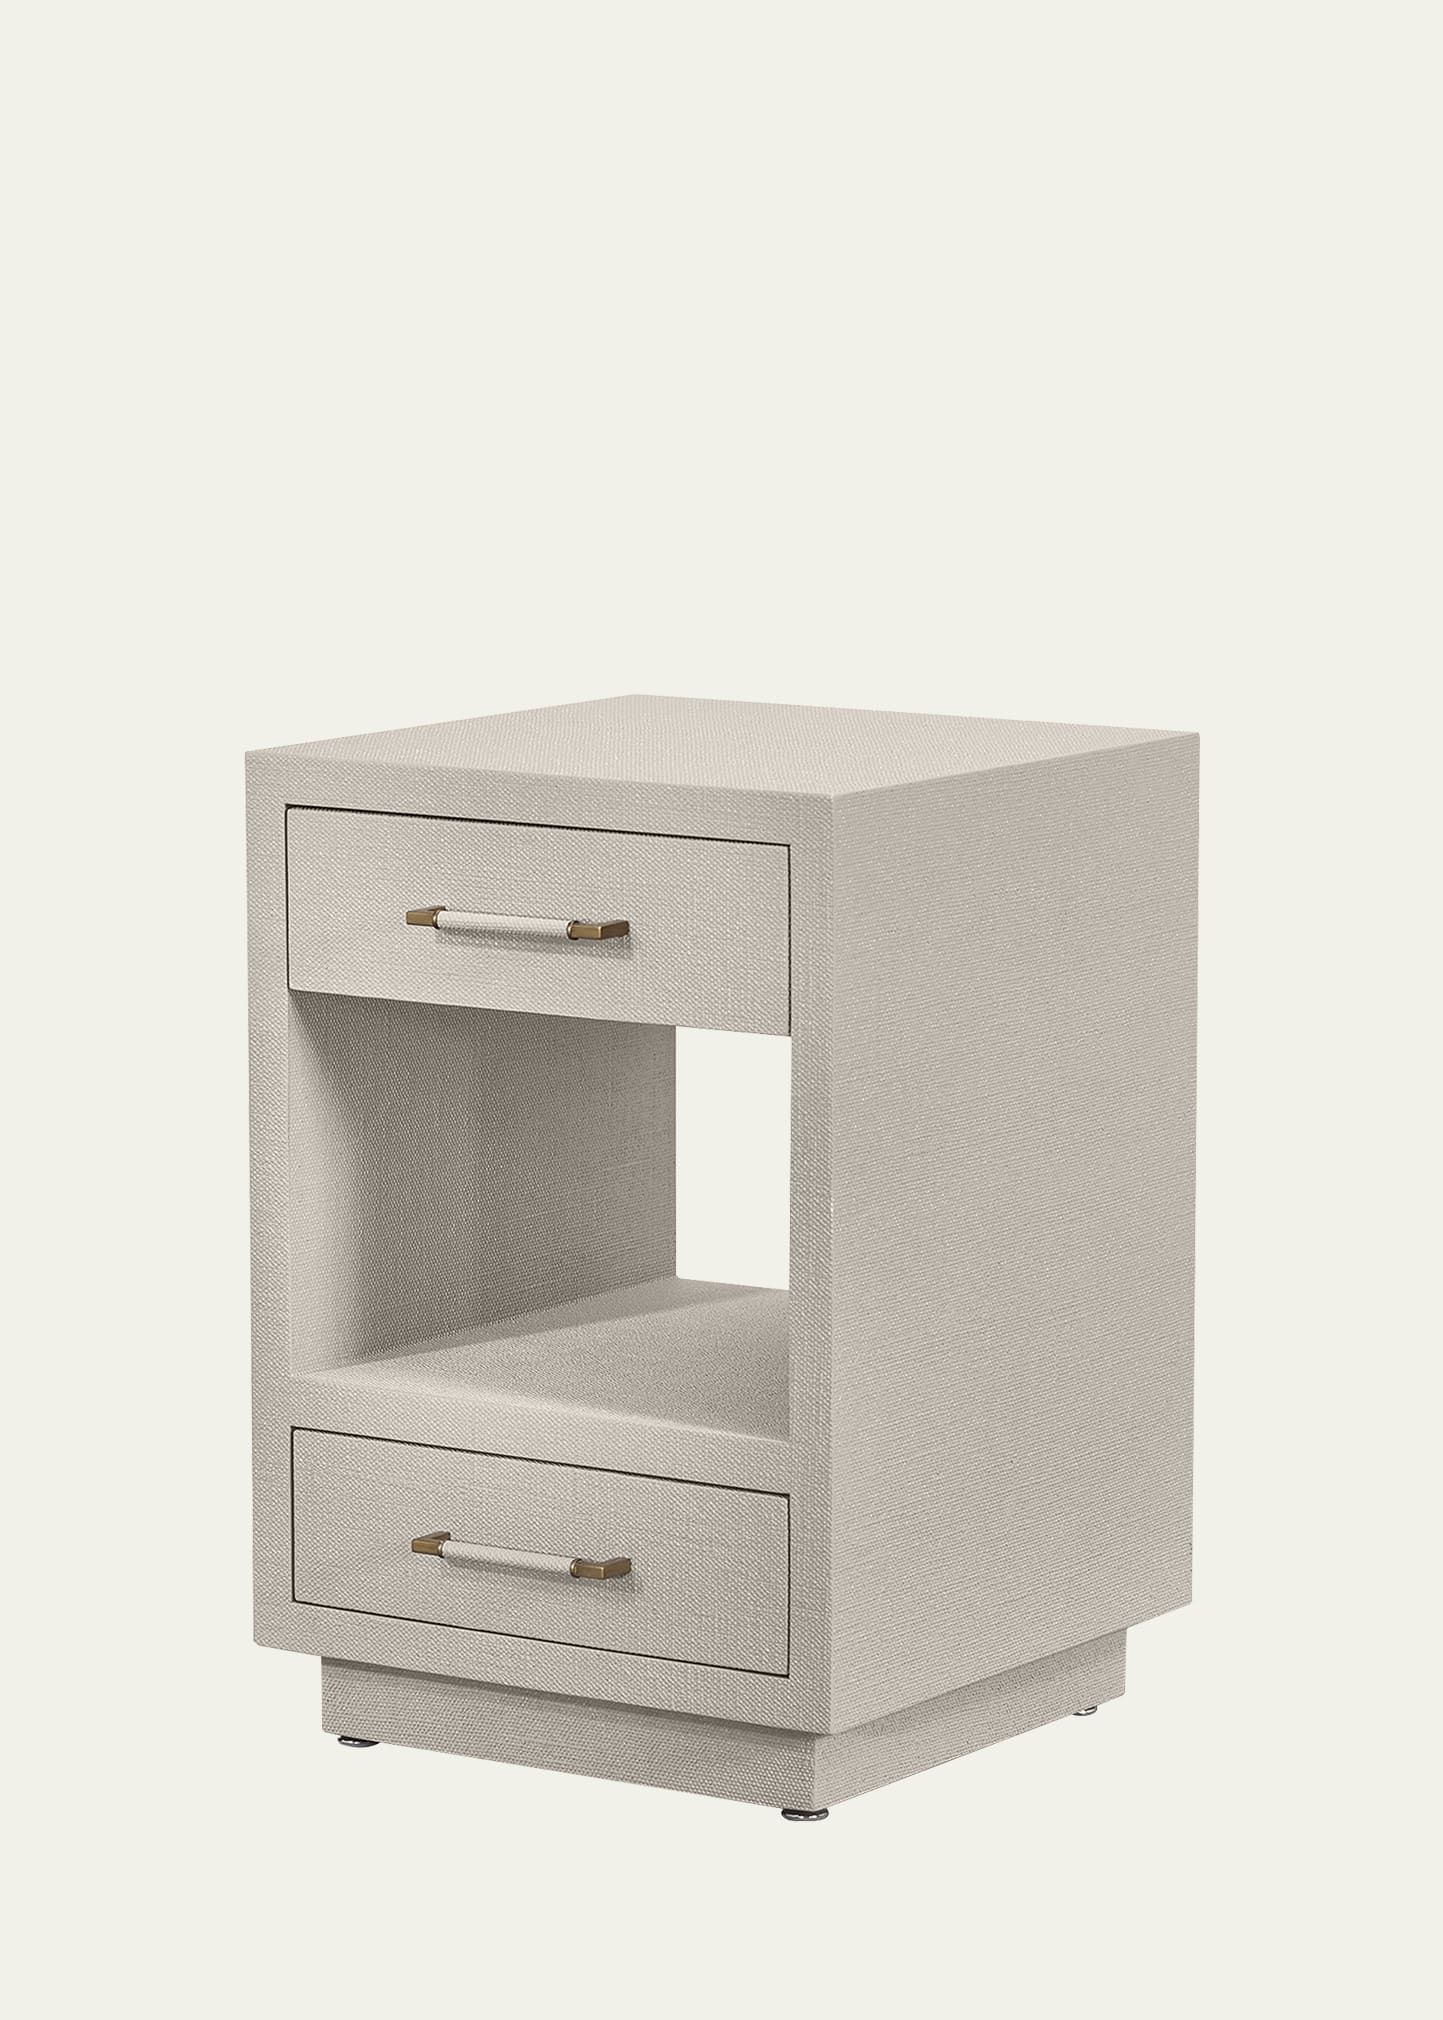 Interlude Home Taylor Small Bedside Chest, Caribbean Sand | Bergdorf Goodman